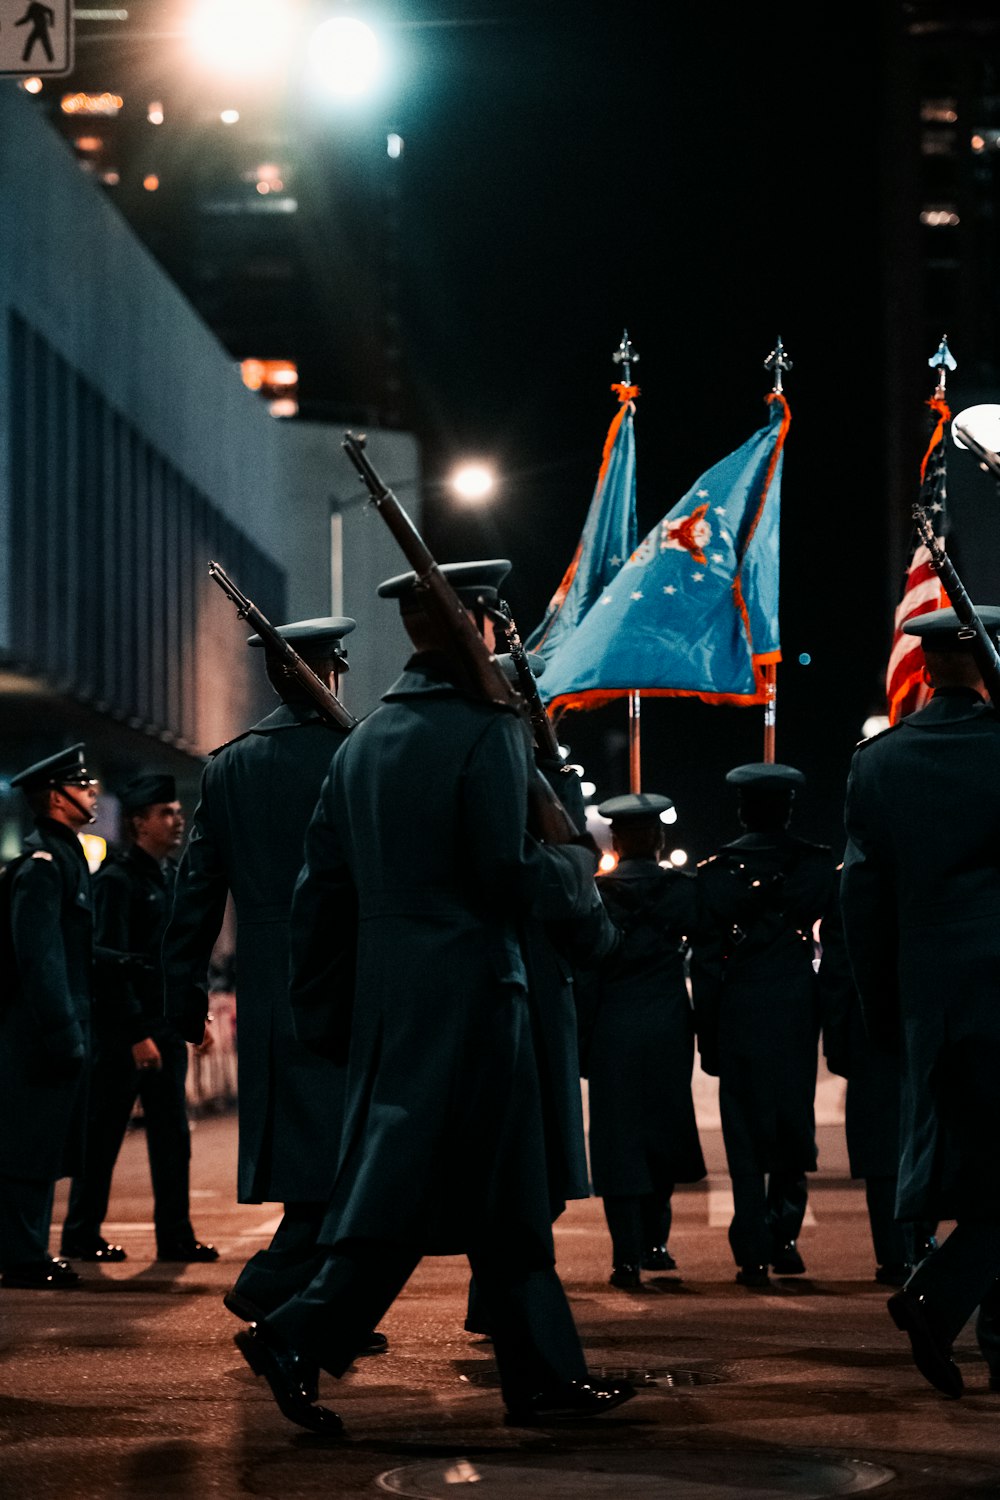 a group of men in uniform marching down a street